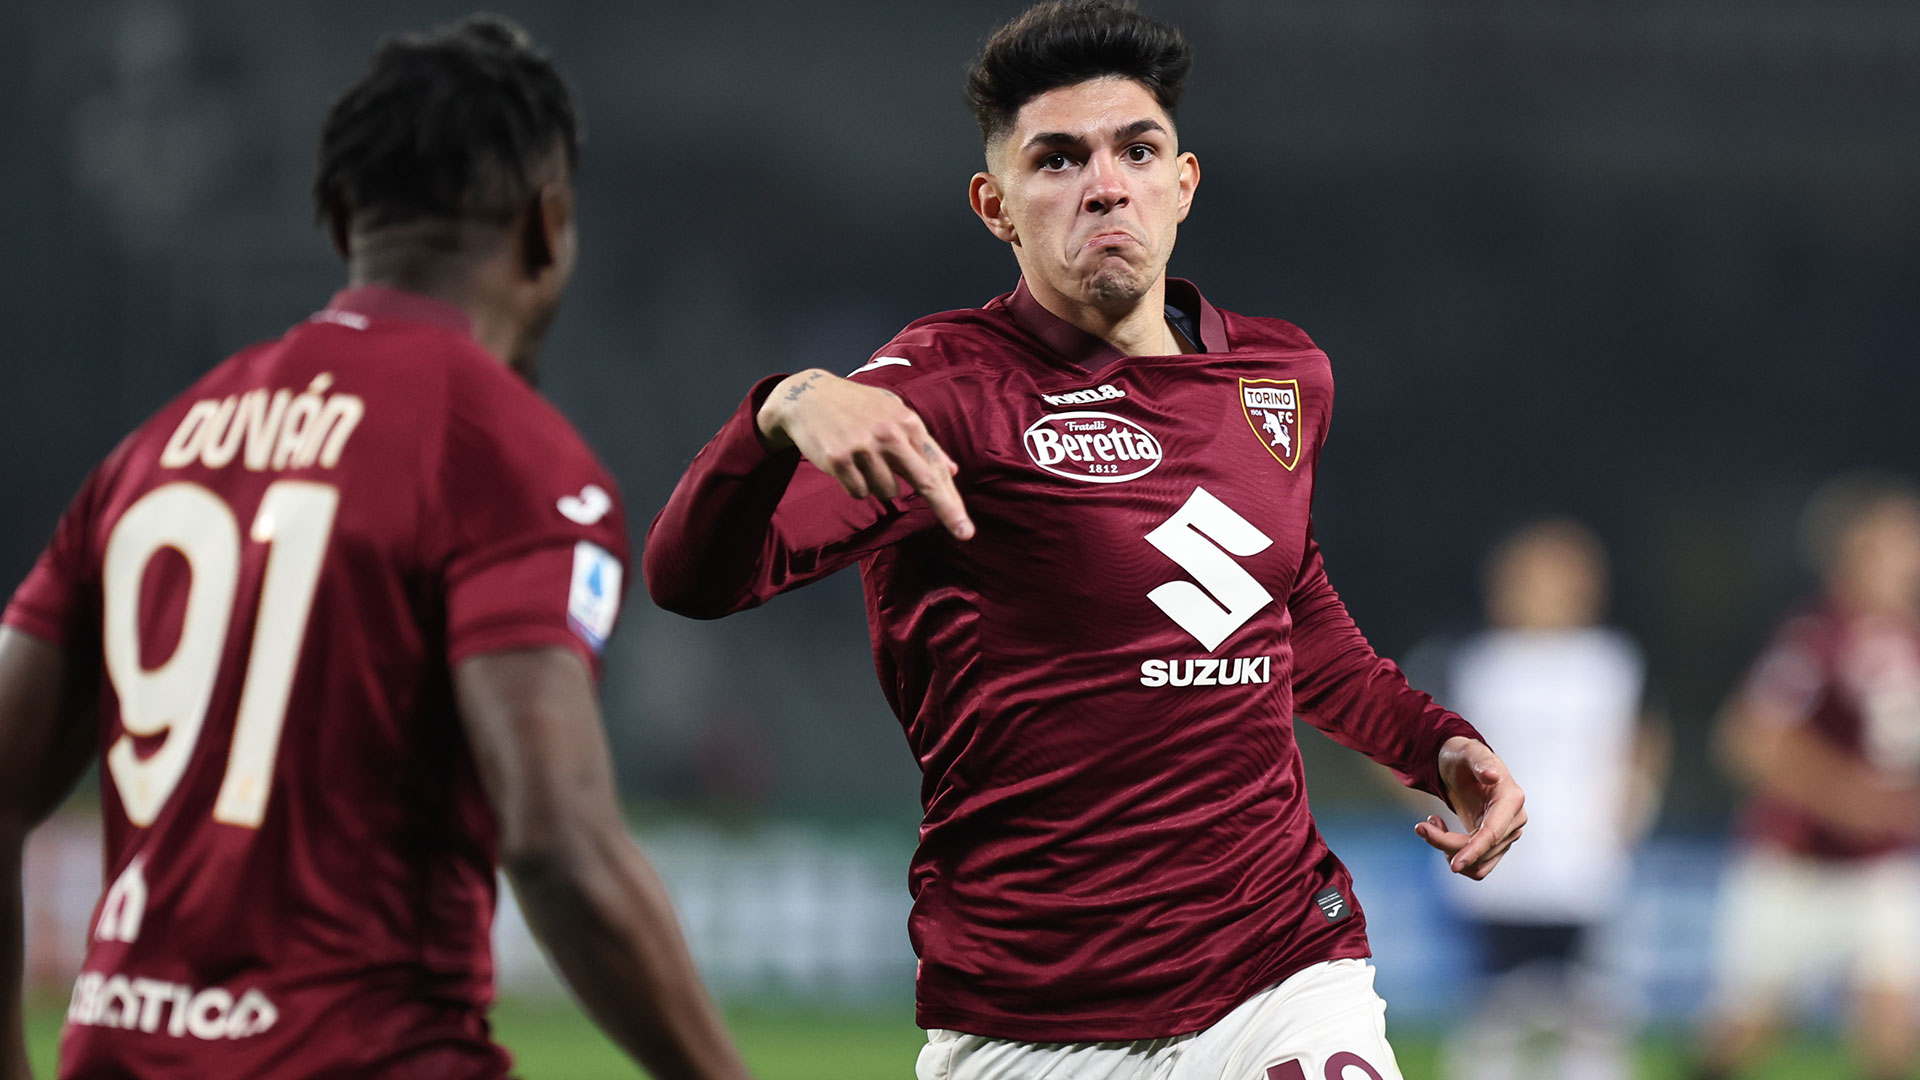 Torino claims victory over 10-man Lecce